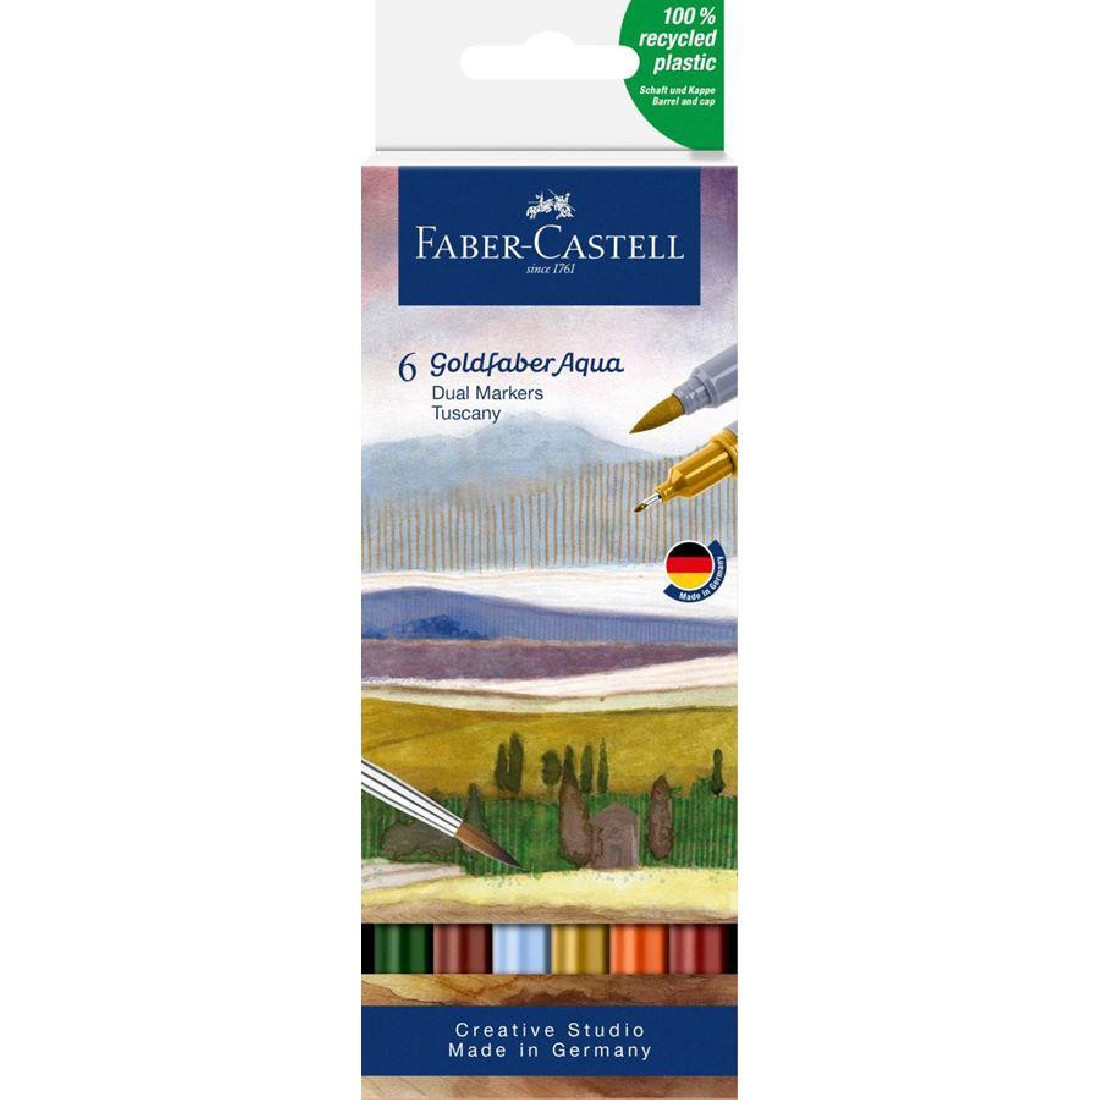 Faber Castell Goldfaber Aqua Dual Marker, wallet of 6, Tuscany 164521